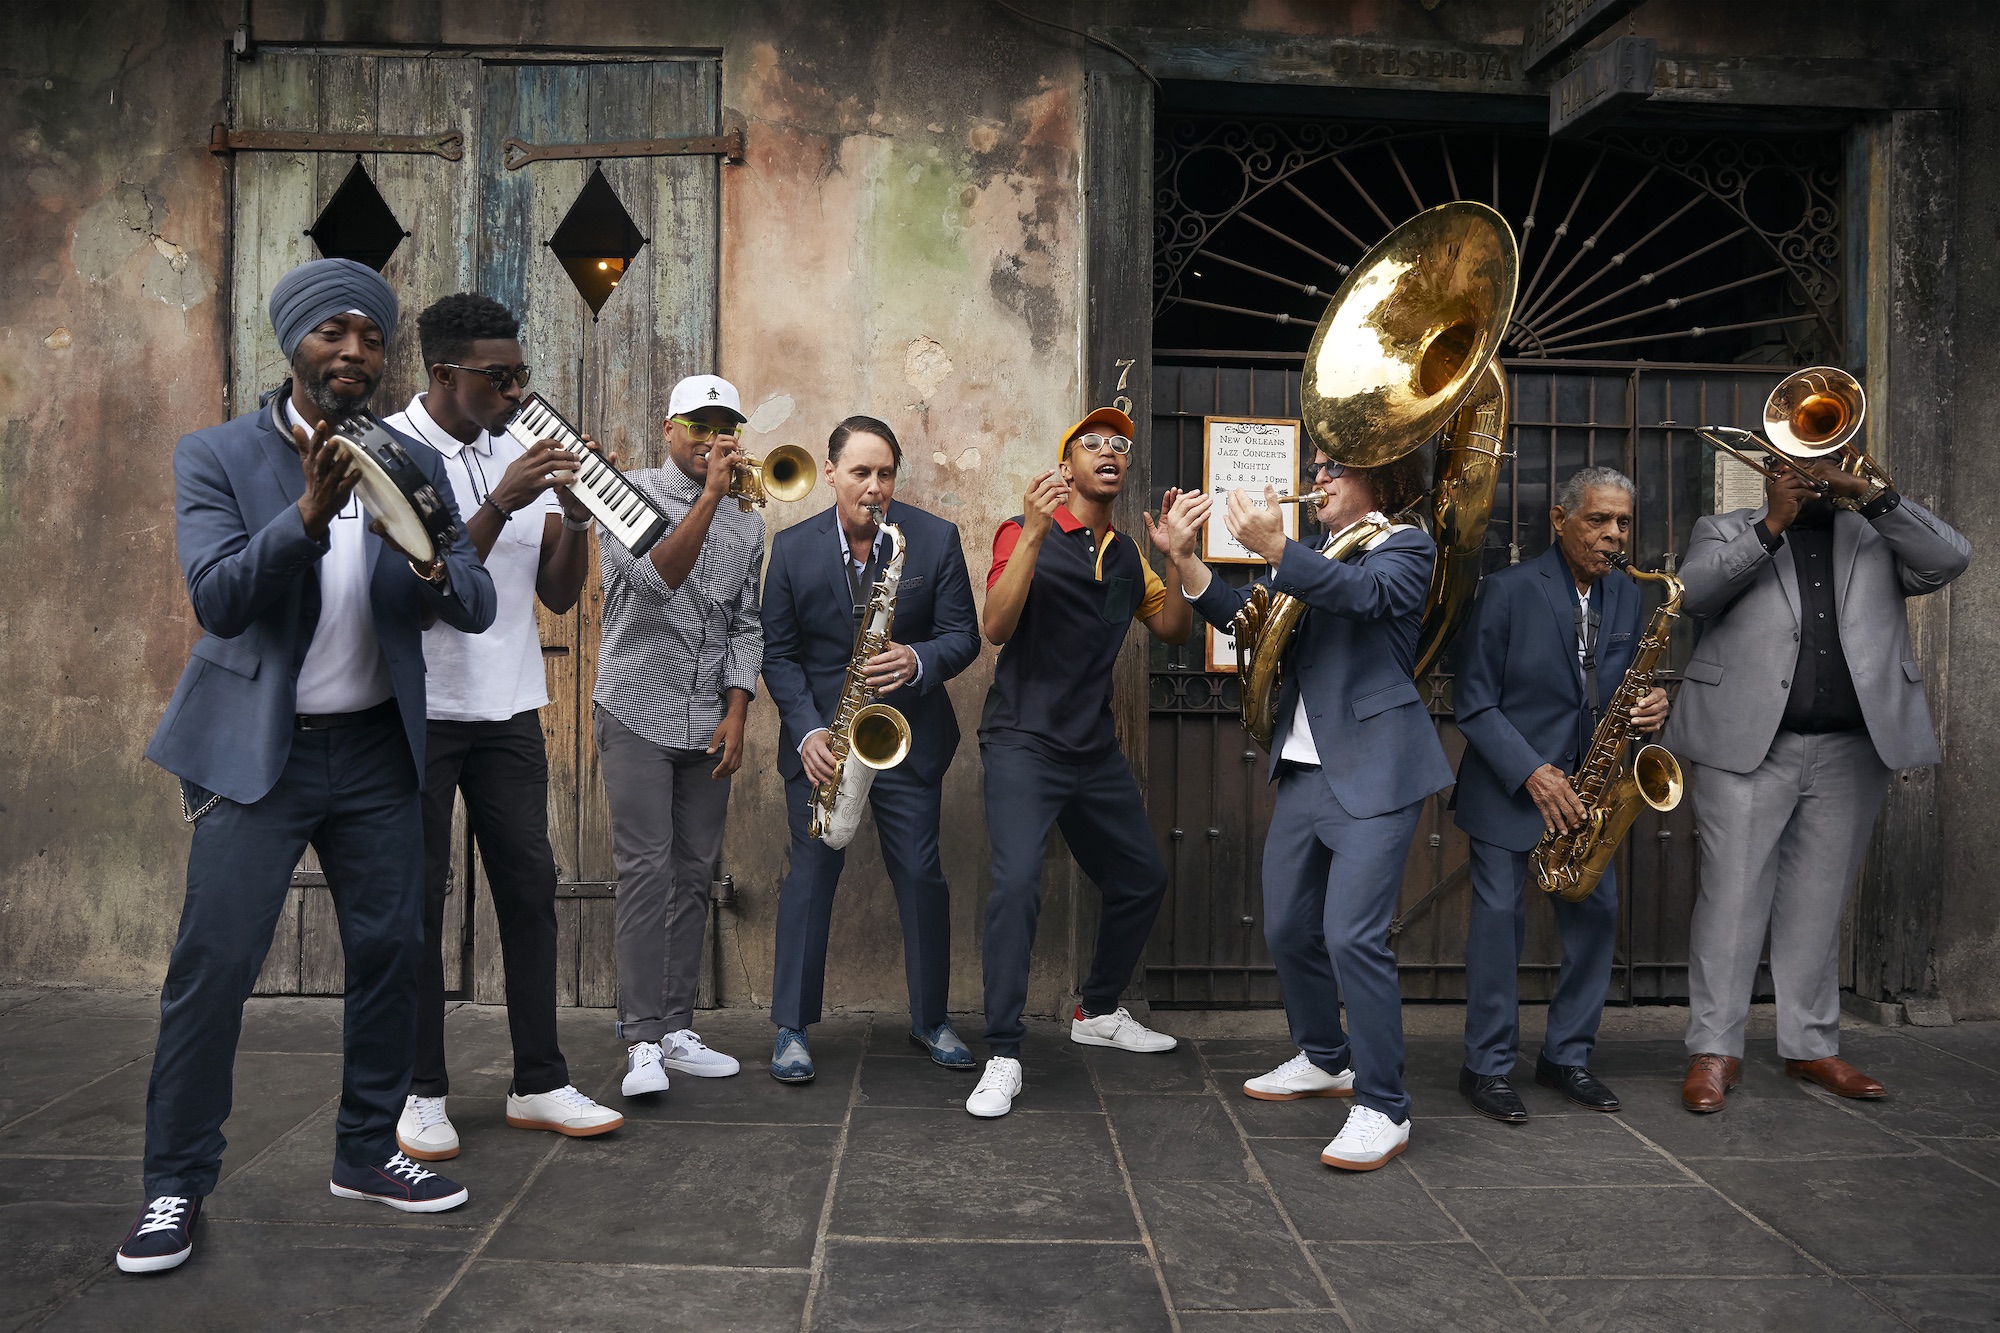 The Preservation Hall Jazz Band stands in front of the New Orleans venue, holding its instruments